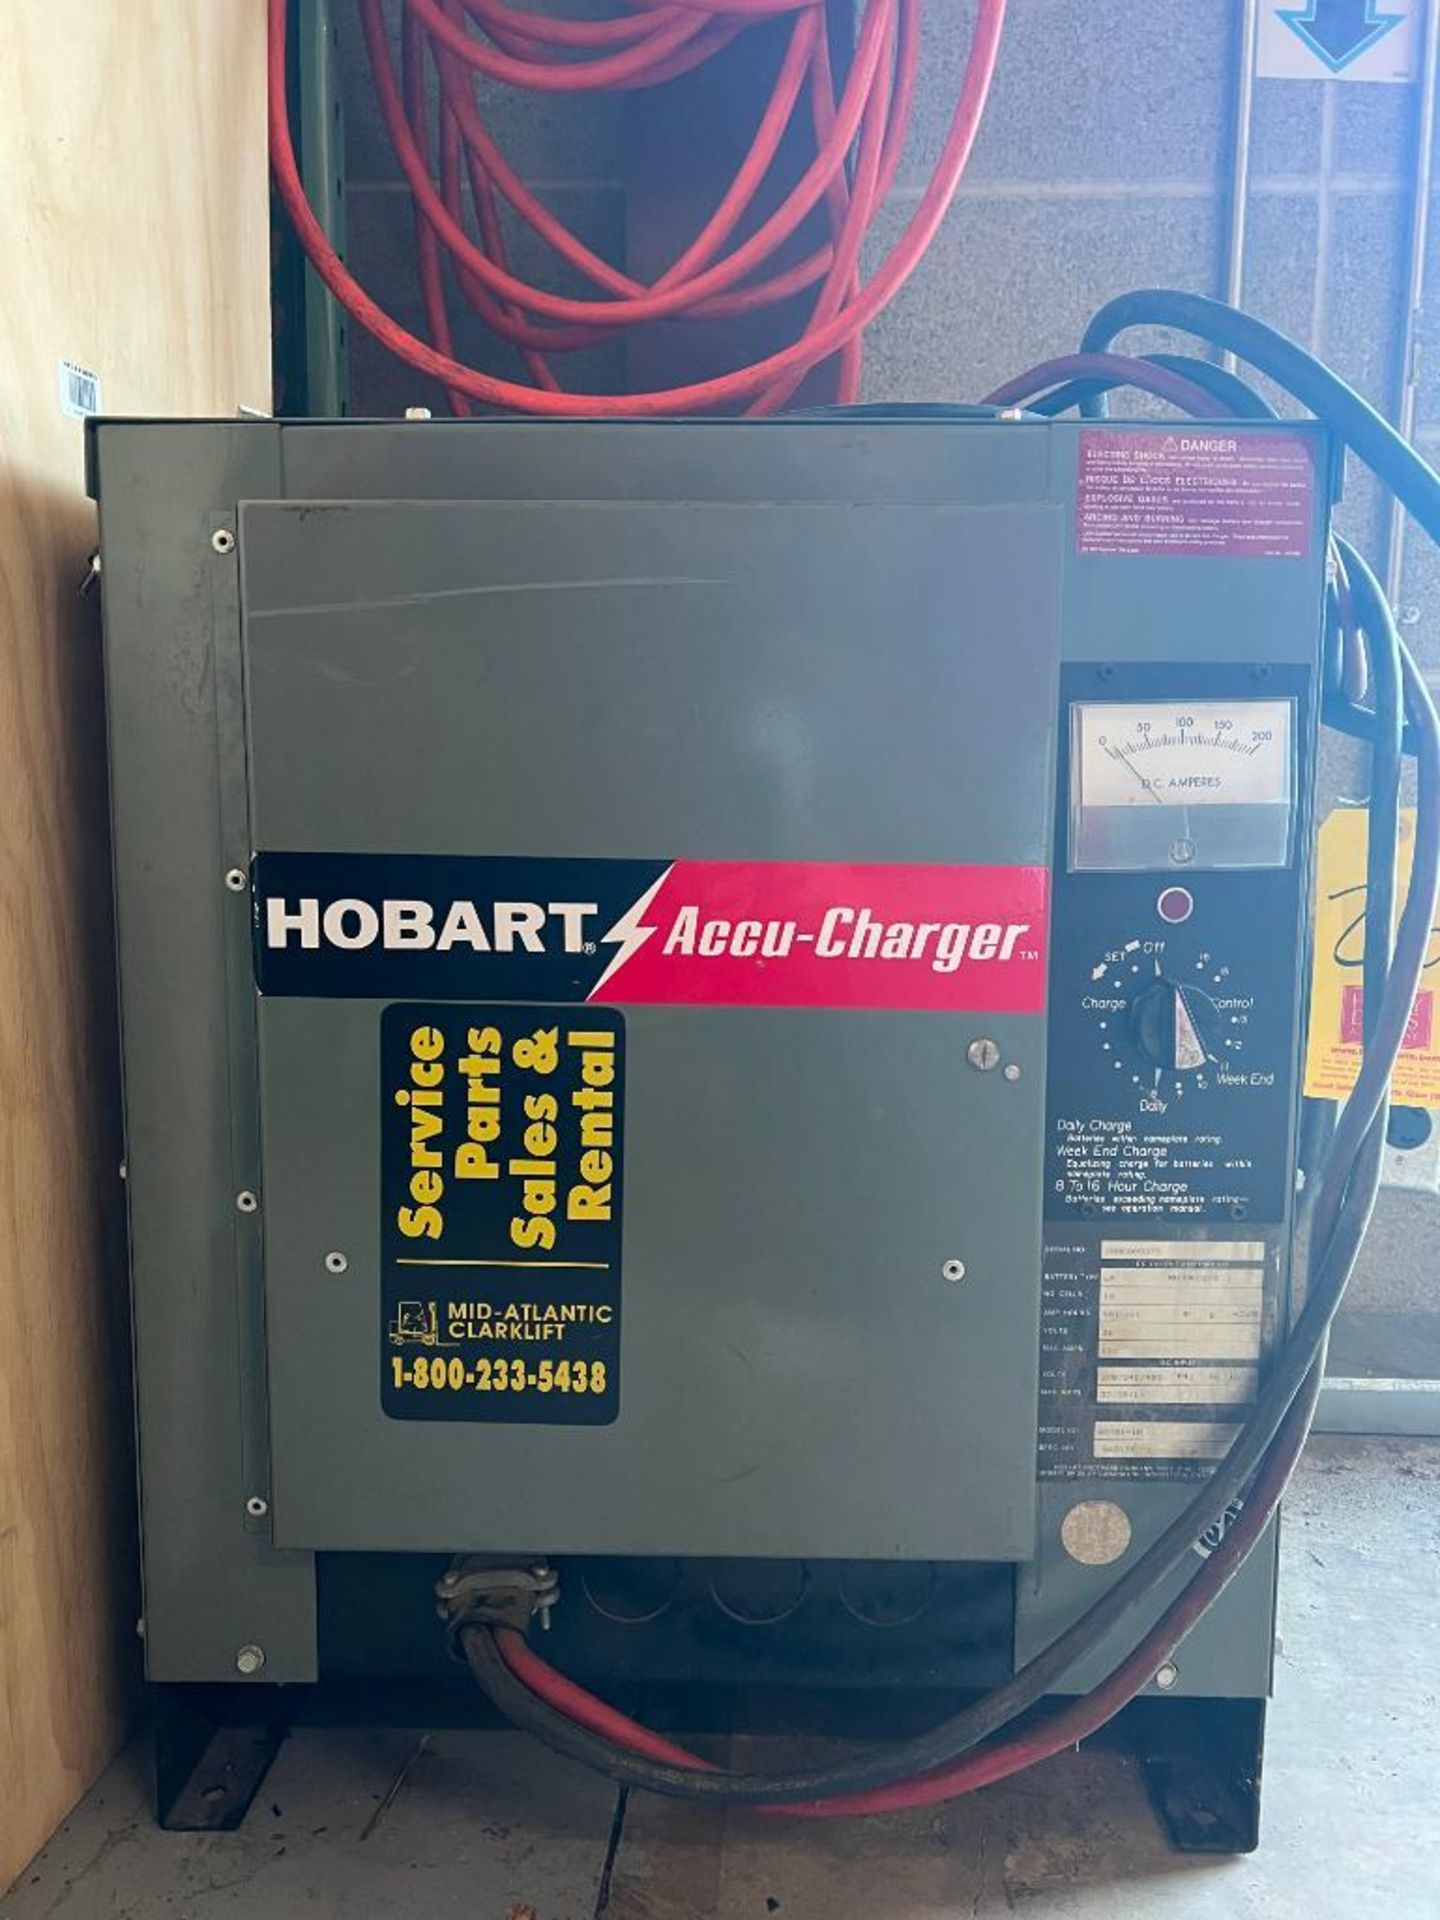 Hobart Accu-Charger 36 Volt Battery Charger